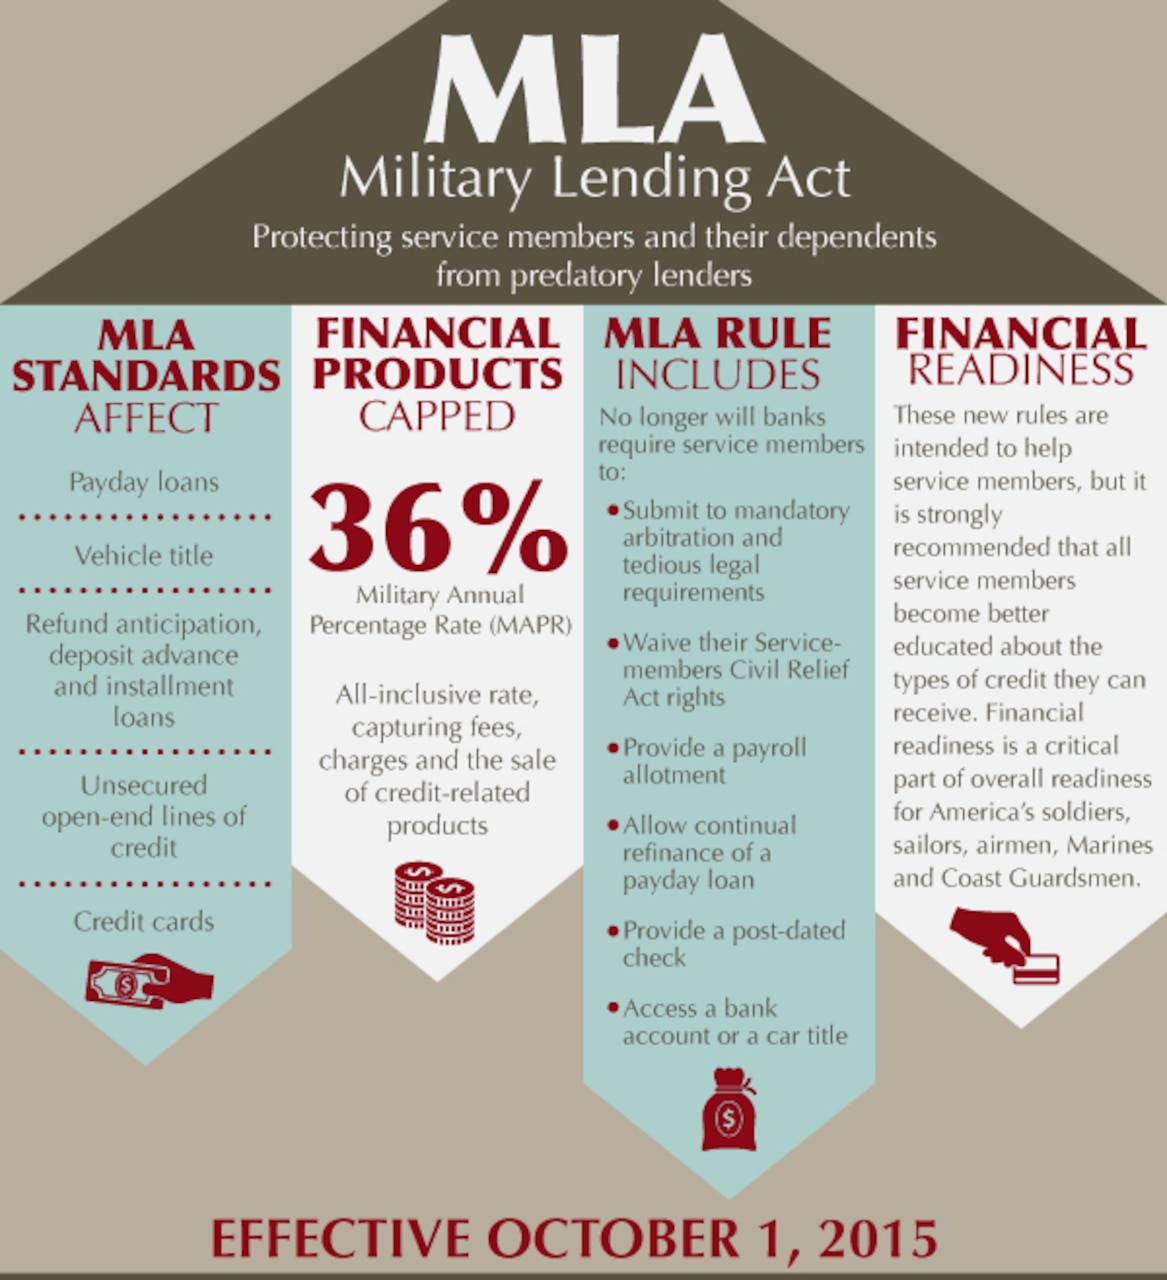 The heightened level of financial and consumer-rights protection against unscrupulous practices, called the final rule of the Military Lending Act, covers all forms of payday loans, vehicle title loans, refund anticipation loans, deposit advance loans, installment loans, unsecured open-end lines of credit and credit cards.